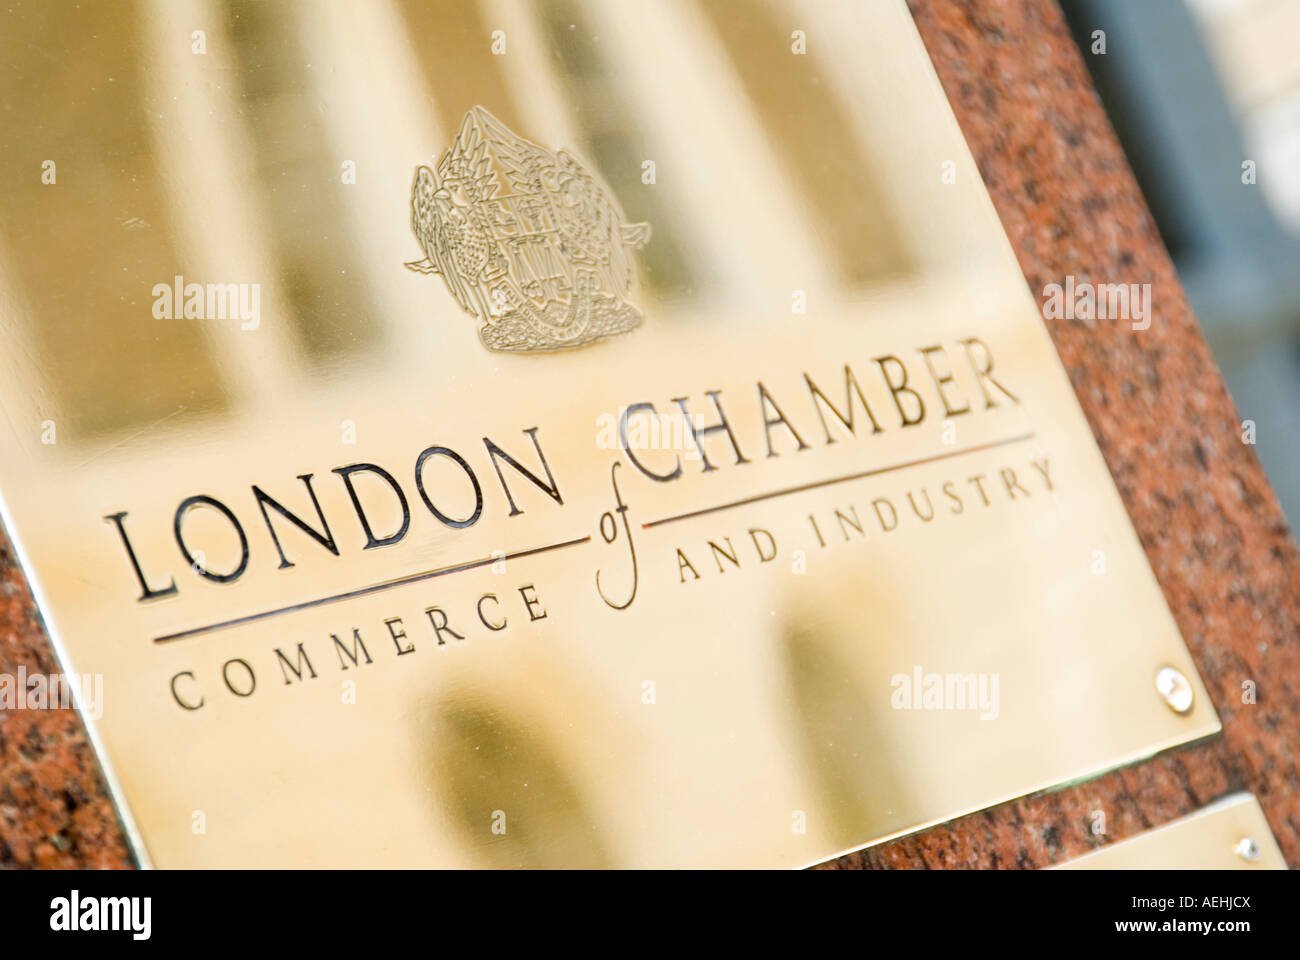 Plaque at the London Chamber of Commerce and Industry headquarters City of London UK Stock Photo